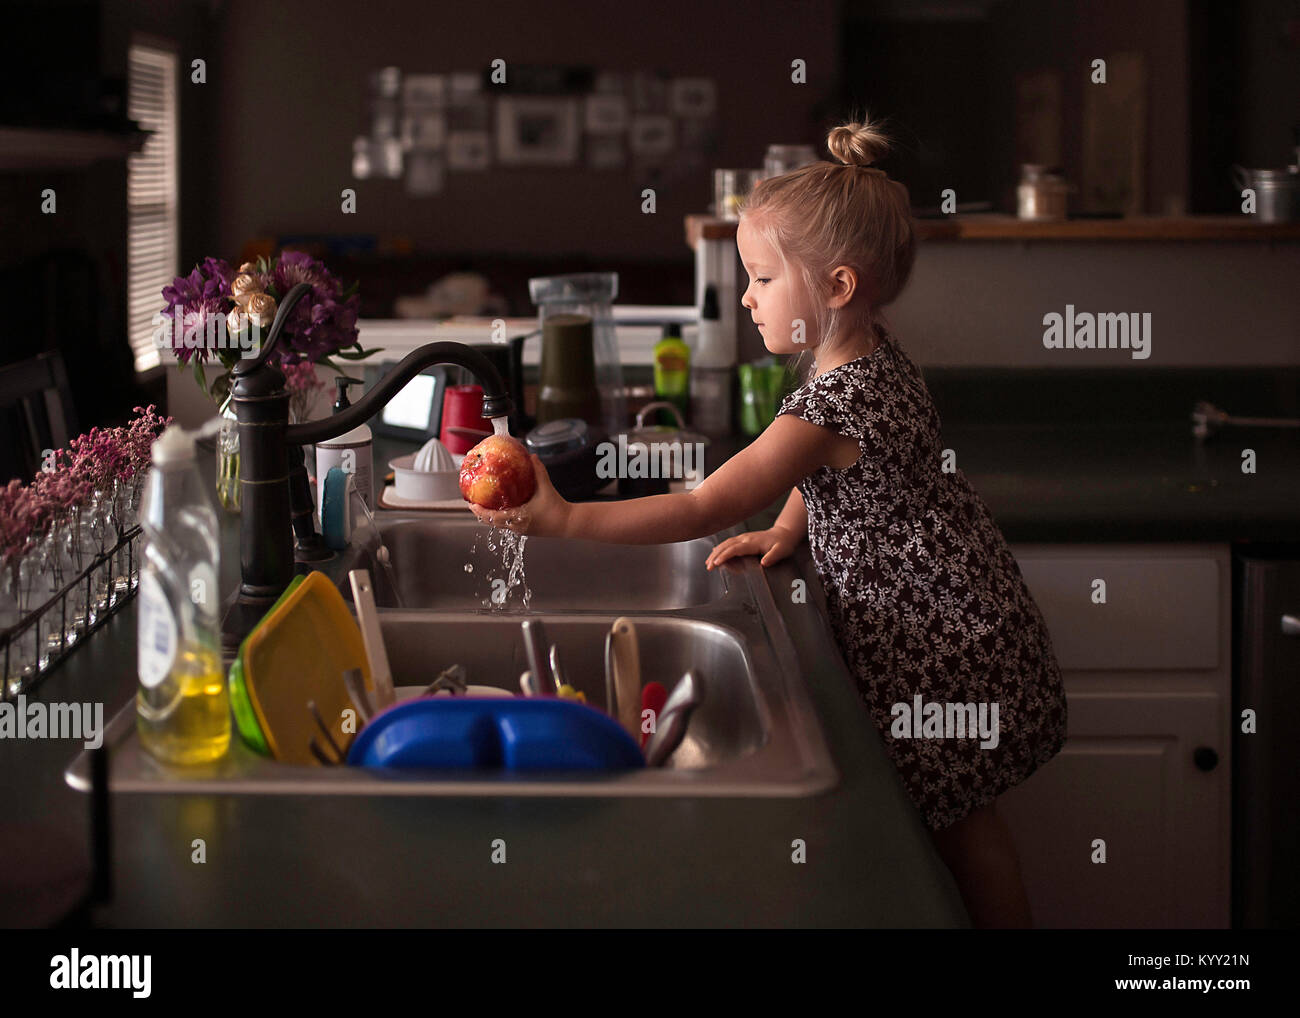 Side view of girl washing apple at kitchen sink Stock Photo